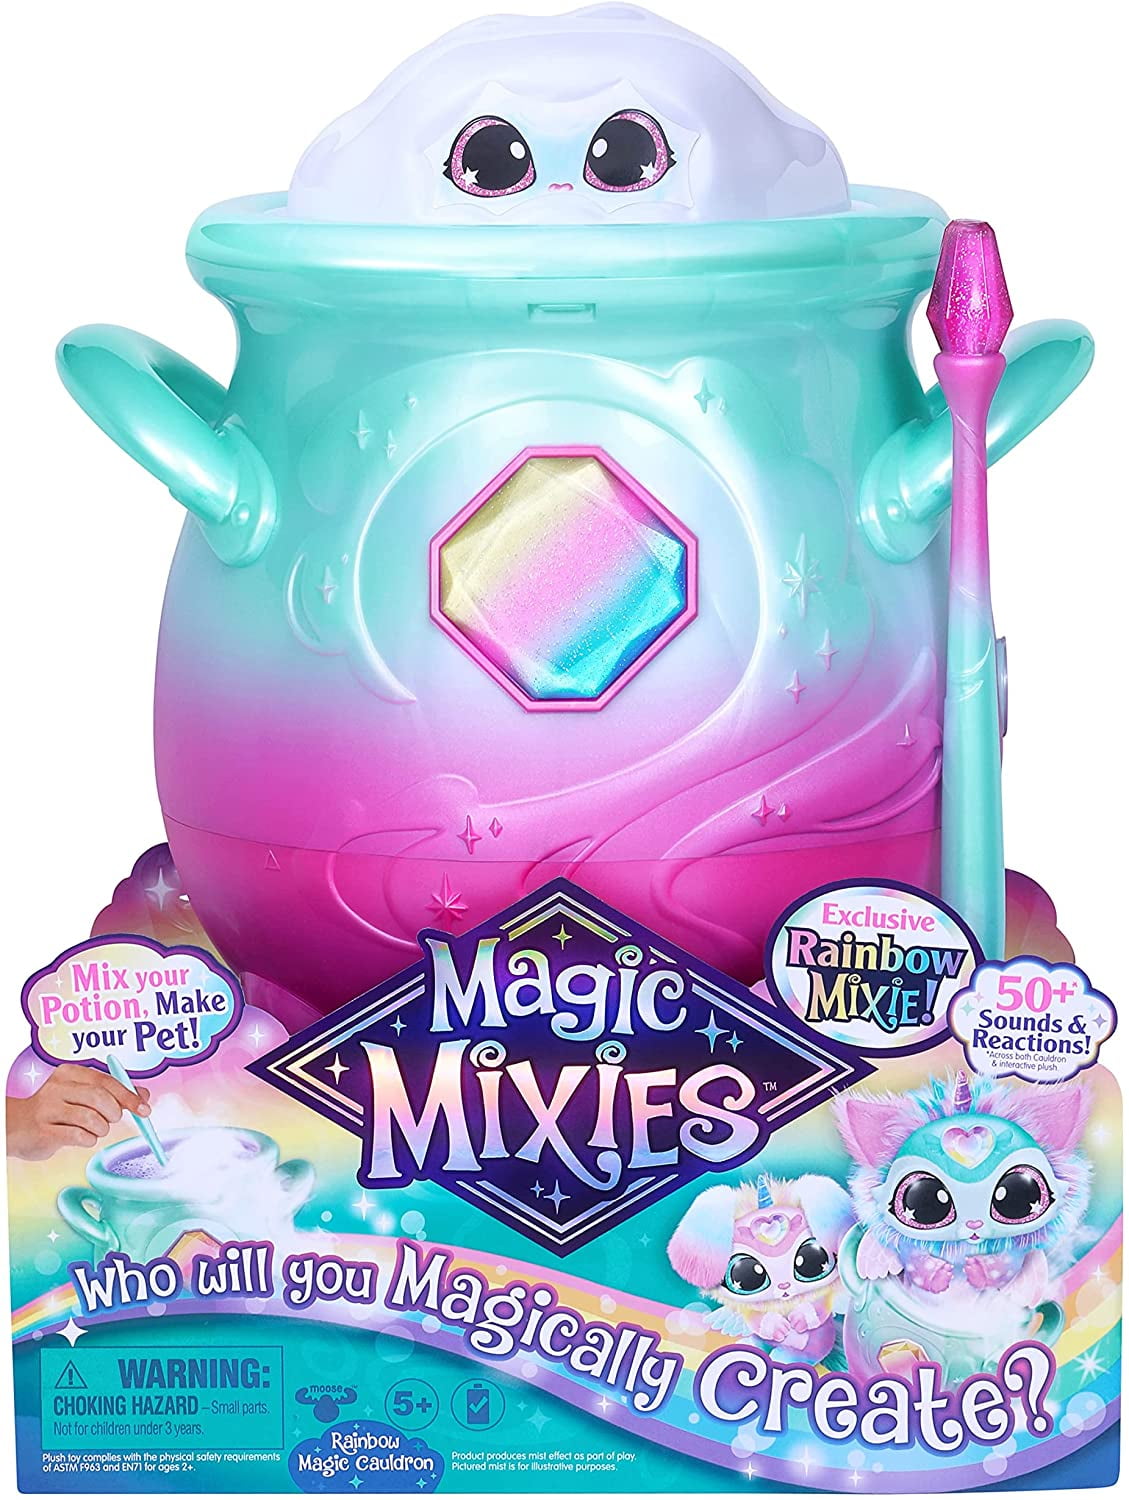 Magic Mixies Magical Misting Cauldron with Exclusive Interactive 8 inch  Rainbow Plush Toy and 50+ Sounds and Reactions